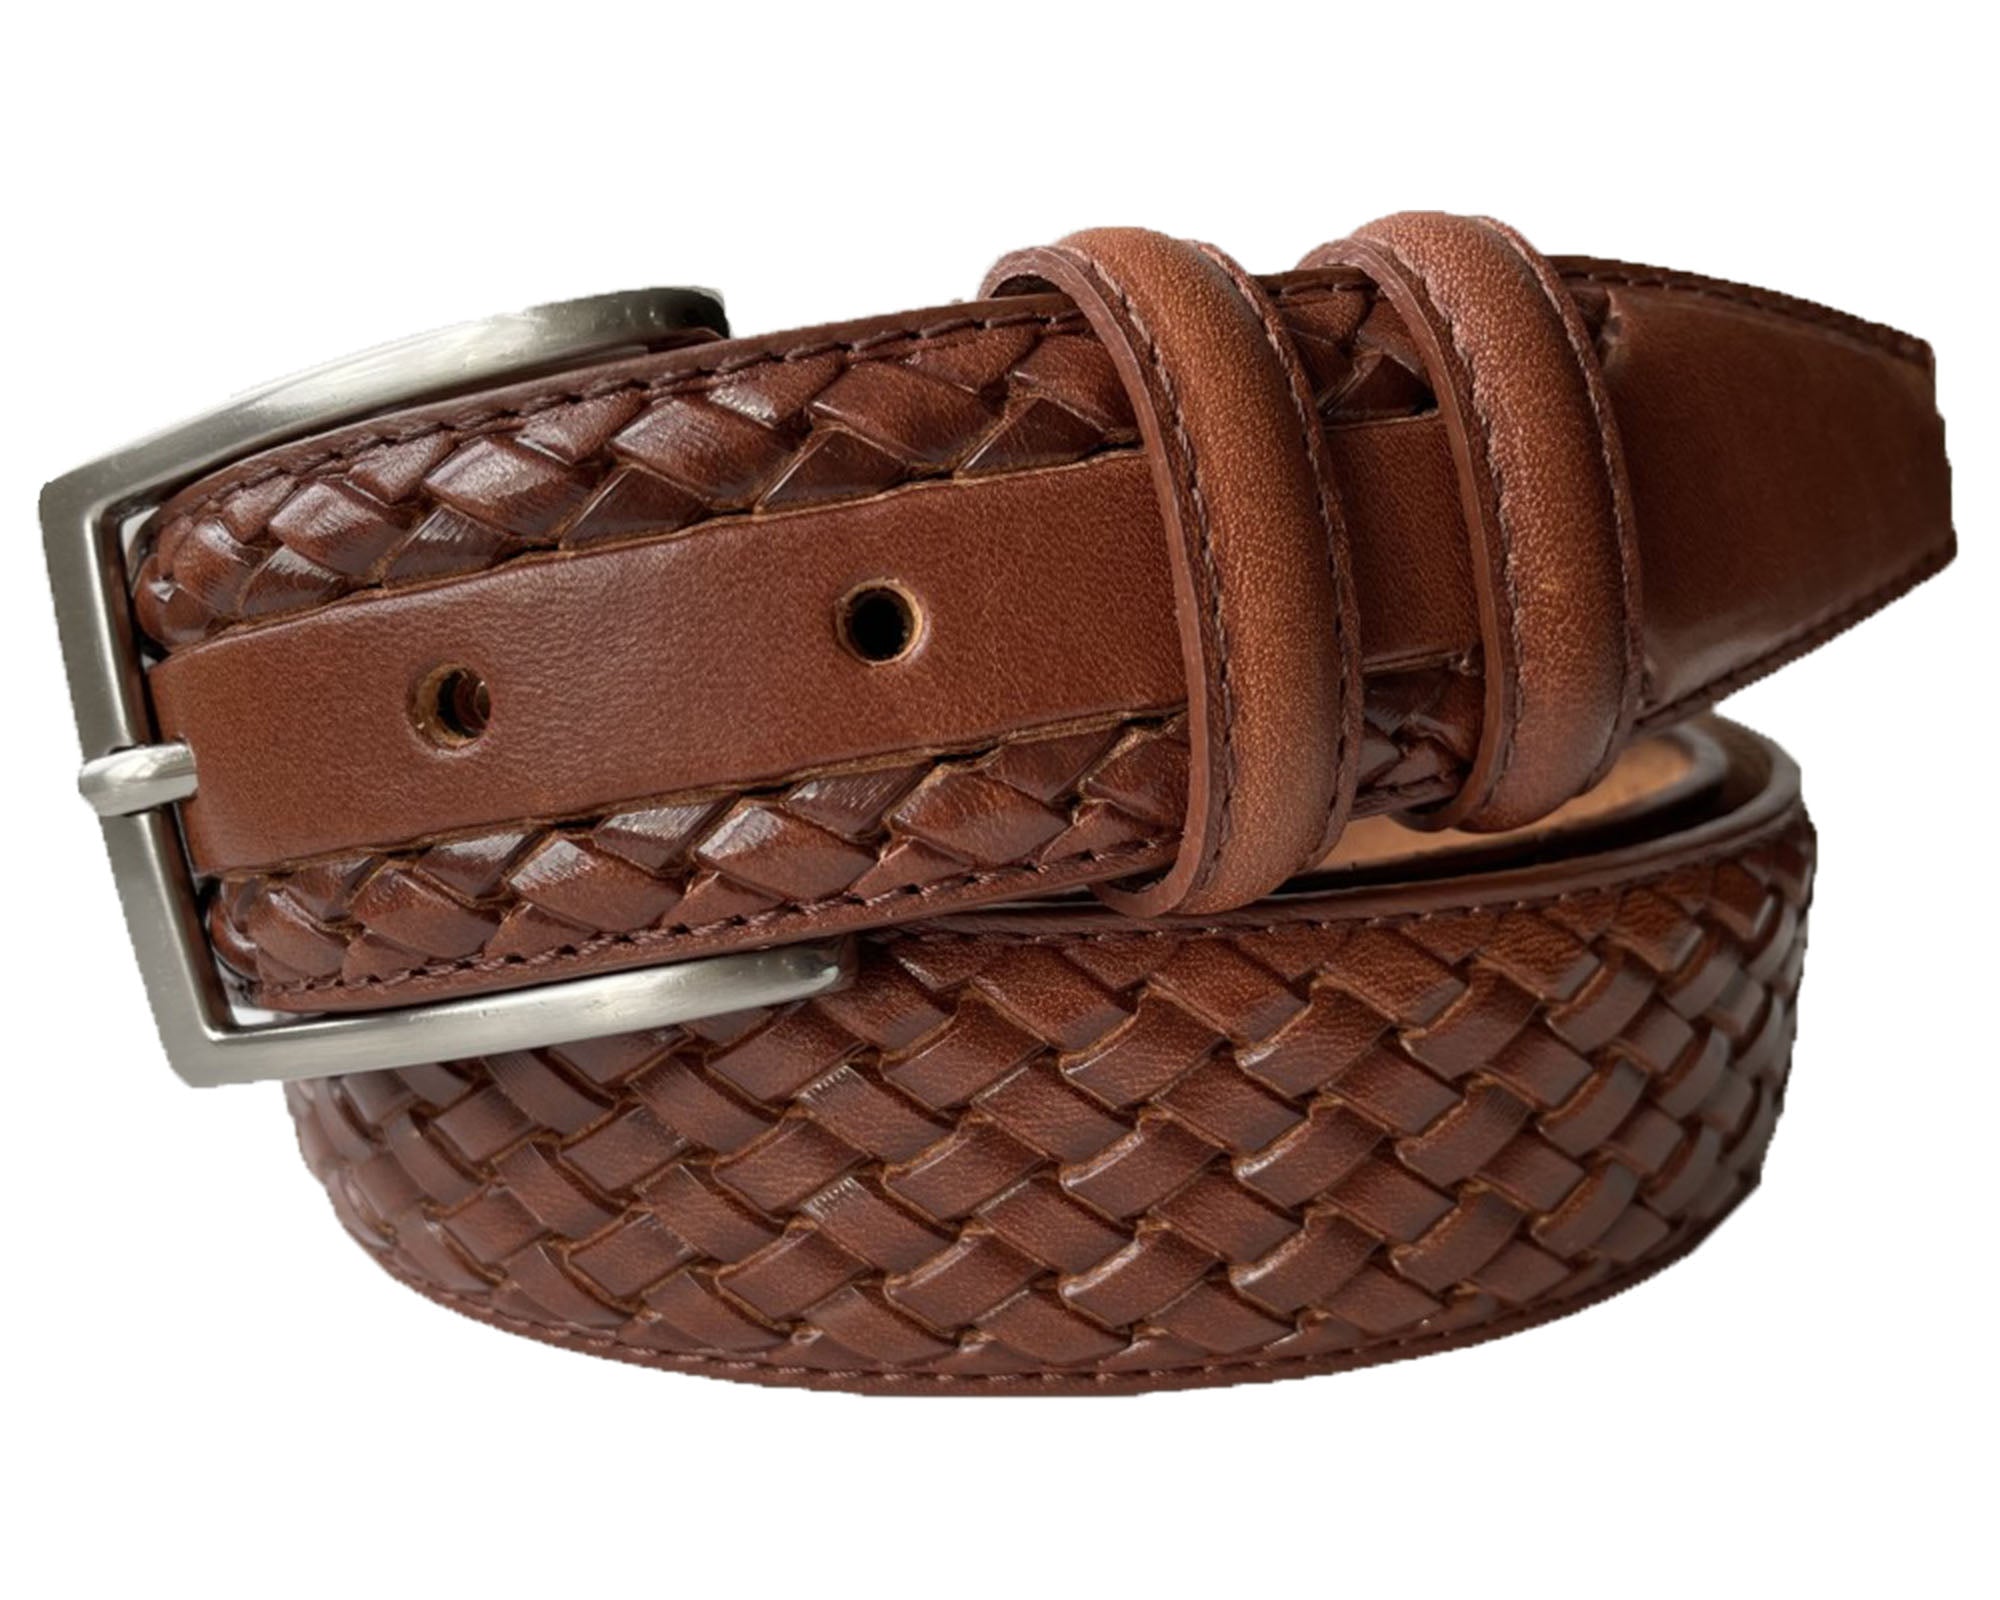 WARM TAN CALF LEATHER BRAID WEAVE EMBOSSED 35MM LEATHER BELT